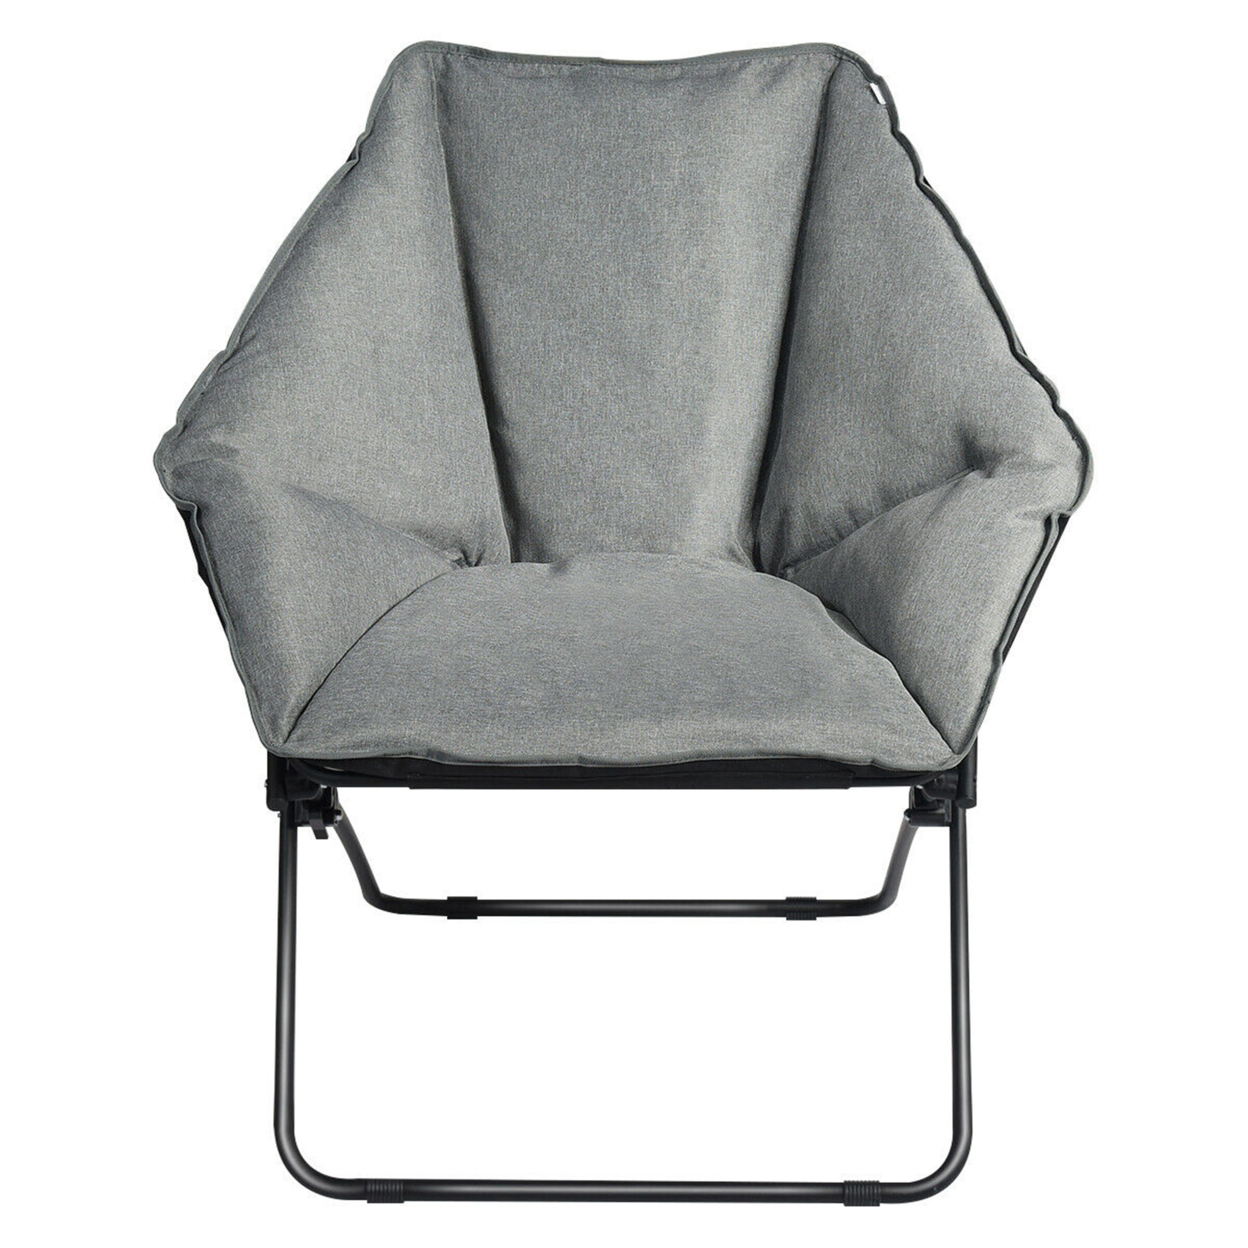 Folding Saucer Padded Chair Soft Wide Seat W/ Metal Frame Lounge Furniture